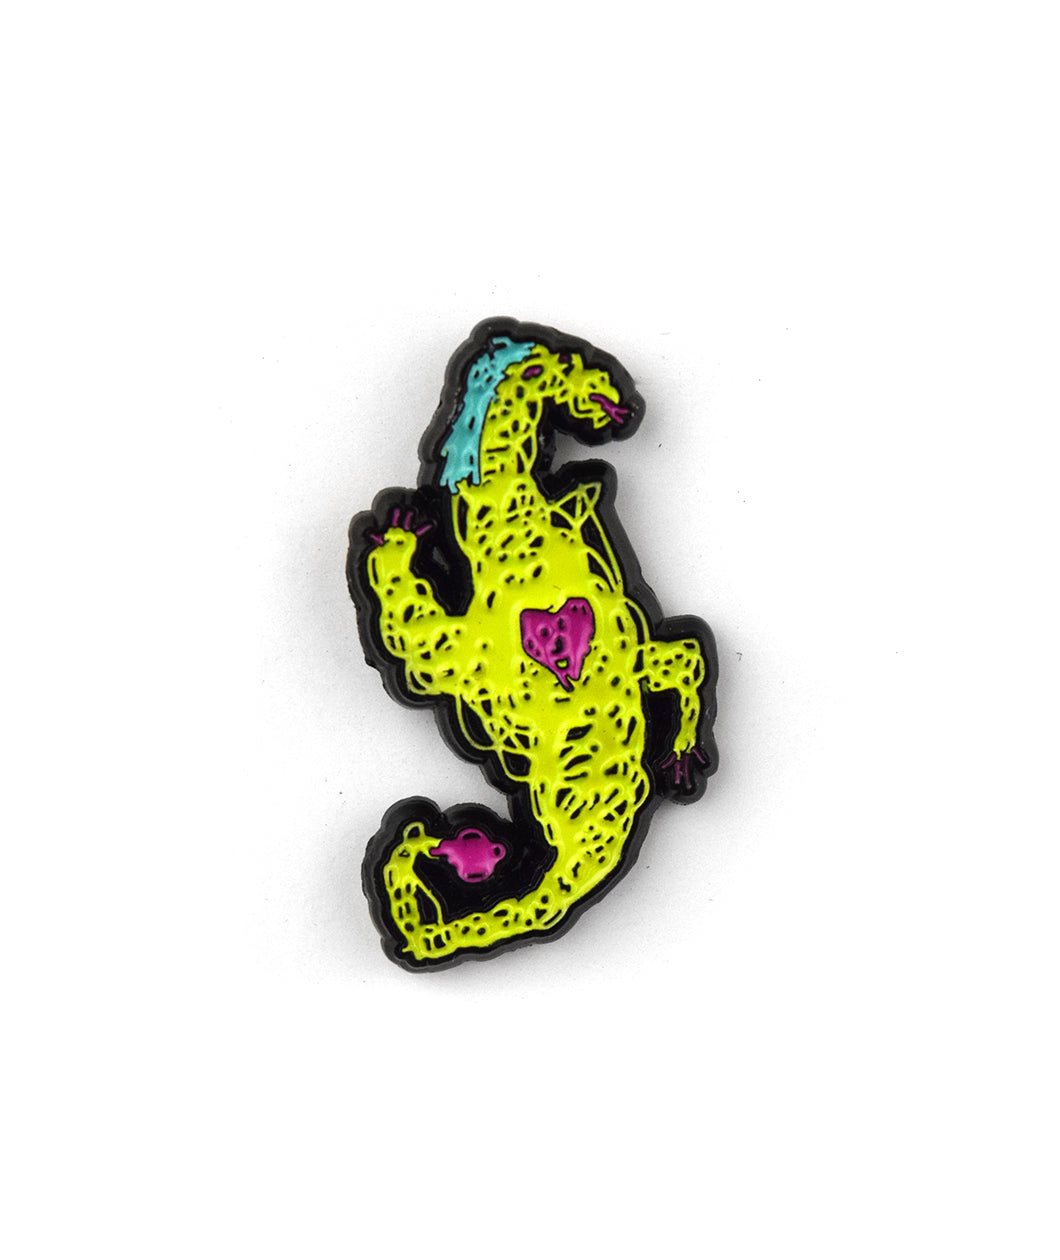 A Hank Green enamel pin of a crude dragon drawn out of scribbles. The dragon is green with a blue mane of hair and has a yellow heart and tail.